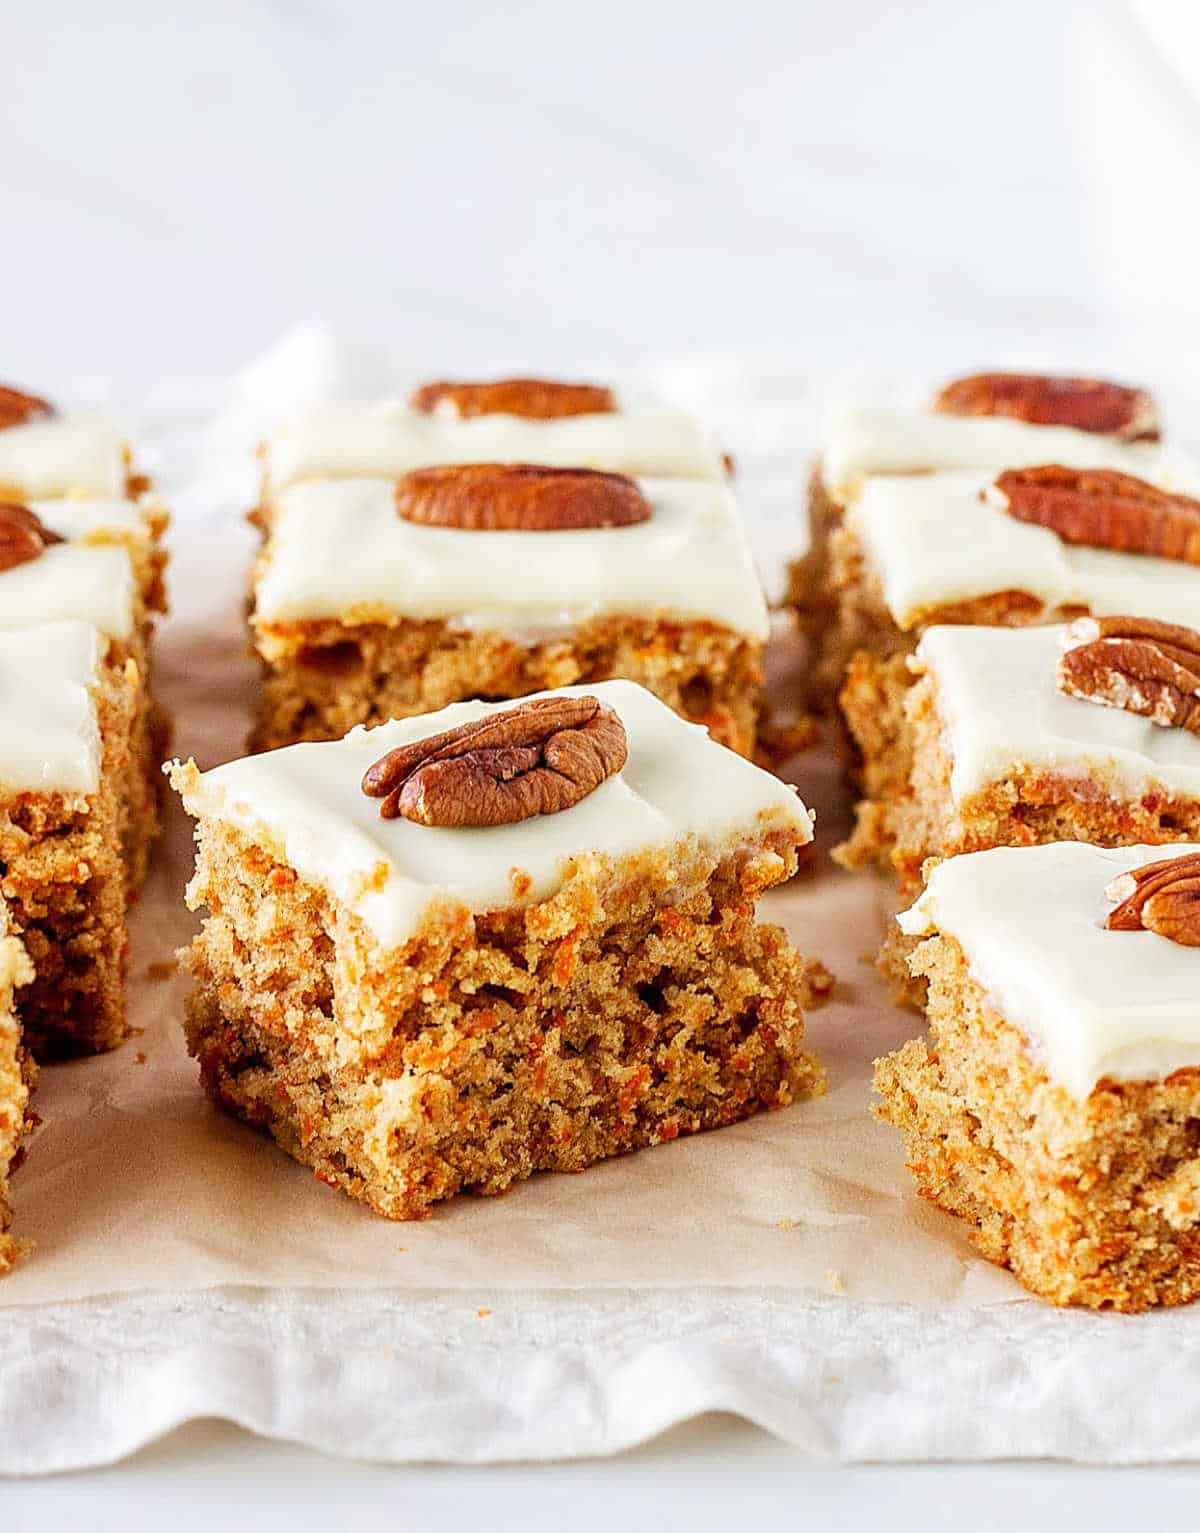 Squares of carrot cake with frosting and pecan, on white paper